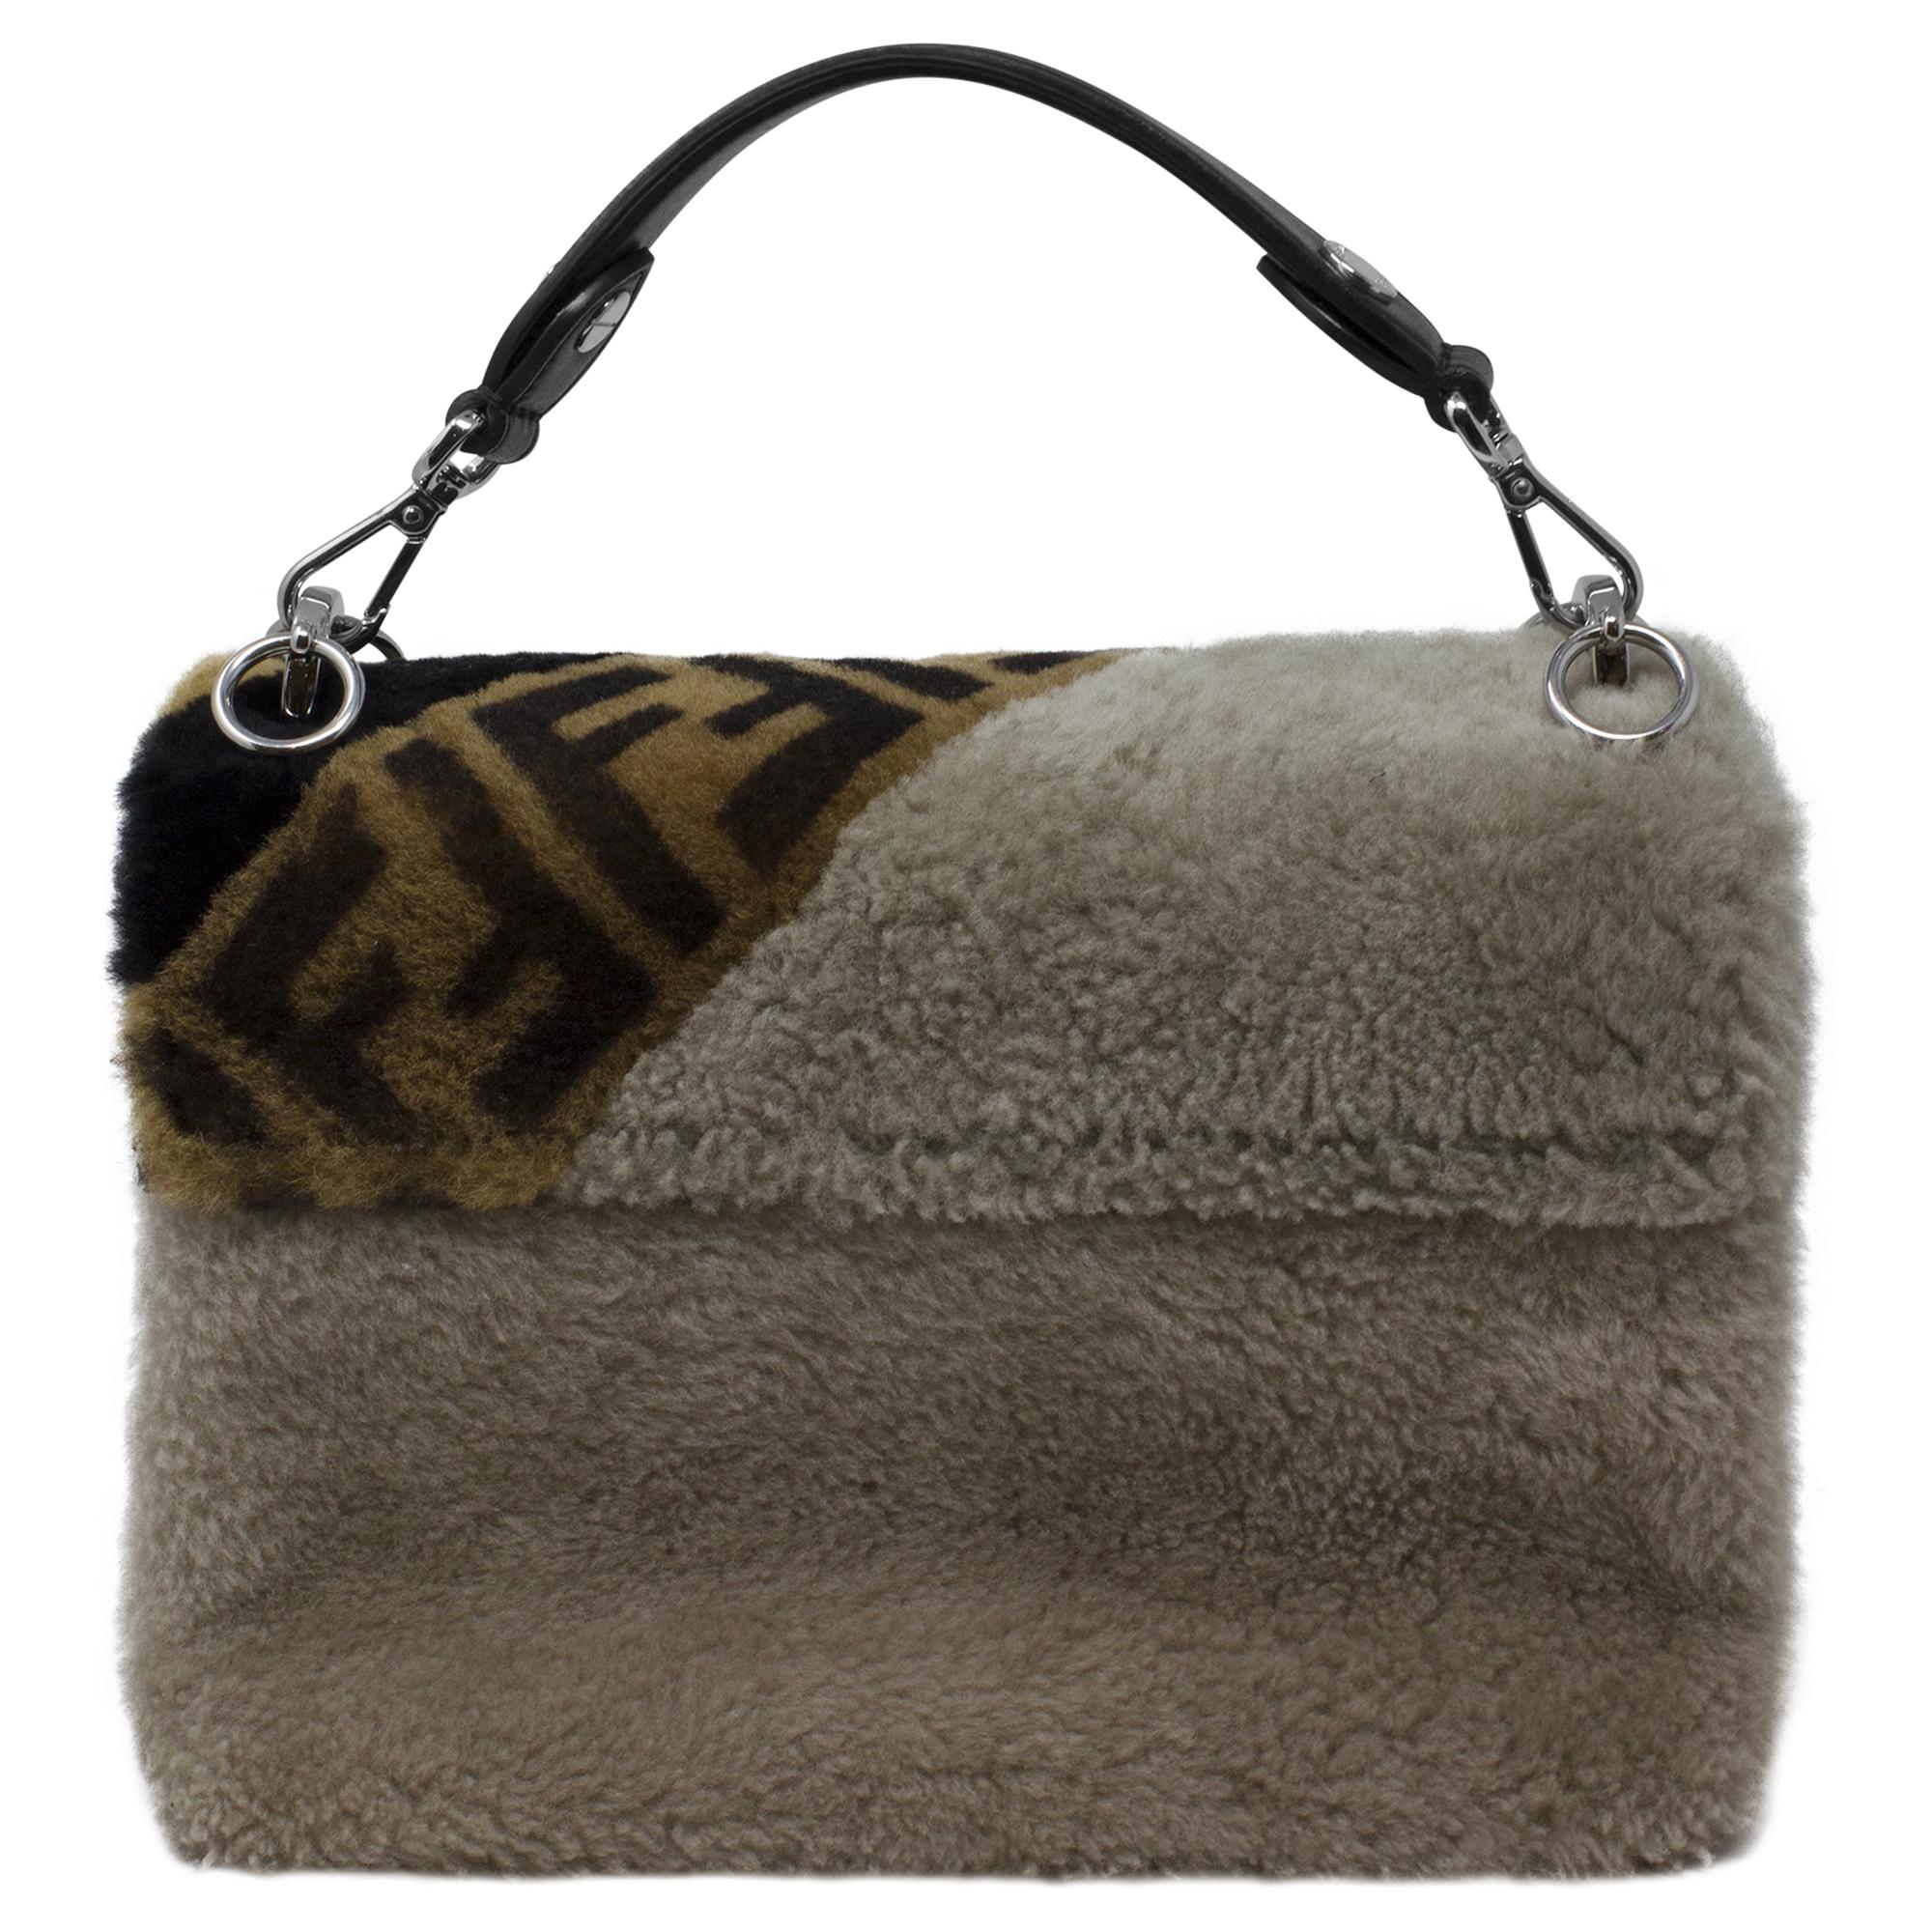 Fendi Limited Edition Shearling Zucca Flap Bag In Excellent Condition For Sale In Atlanta, GA